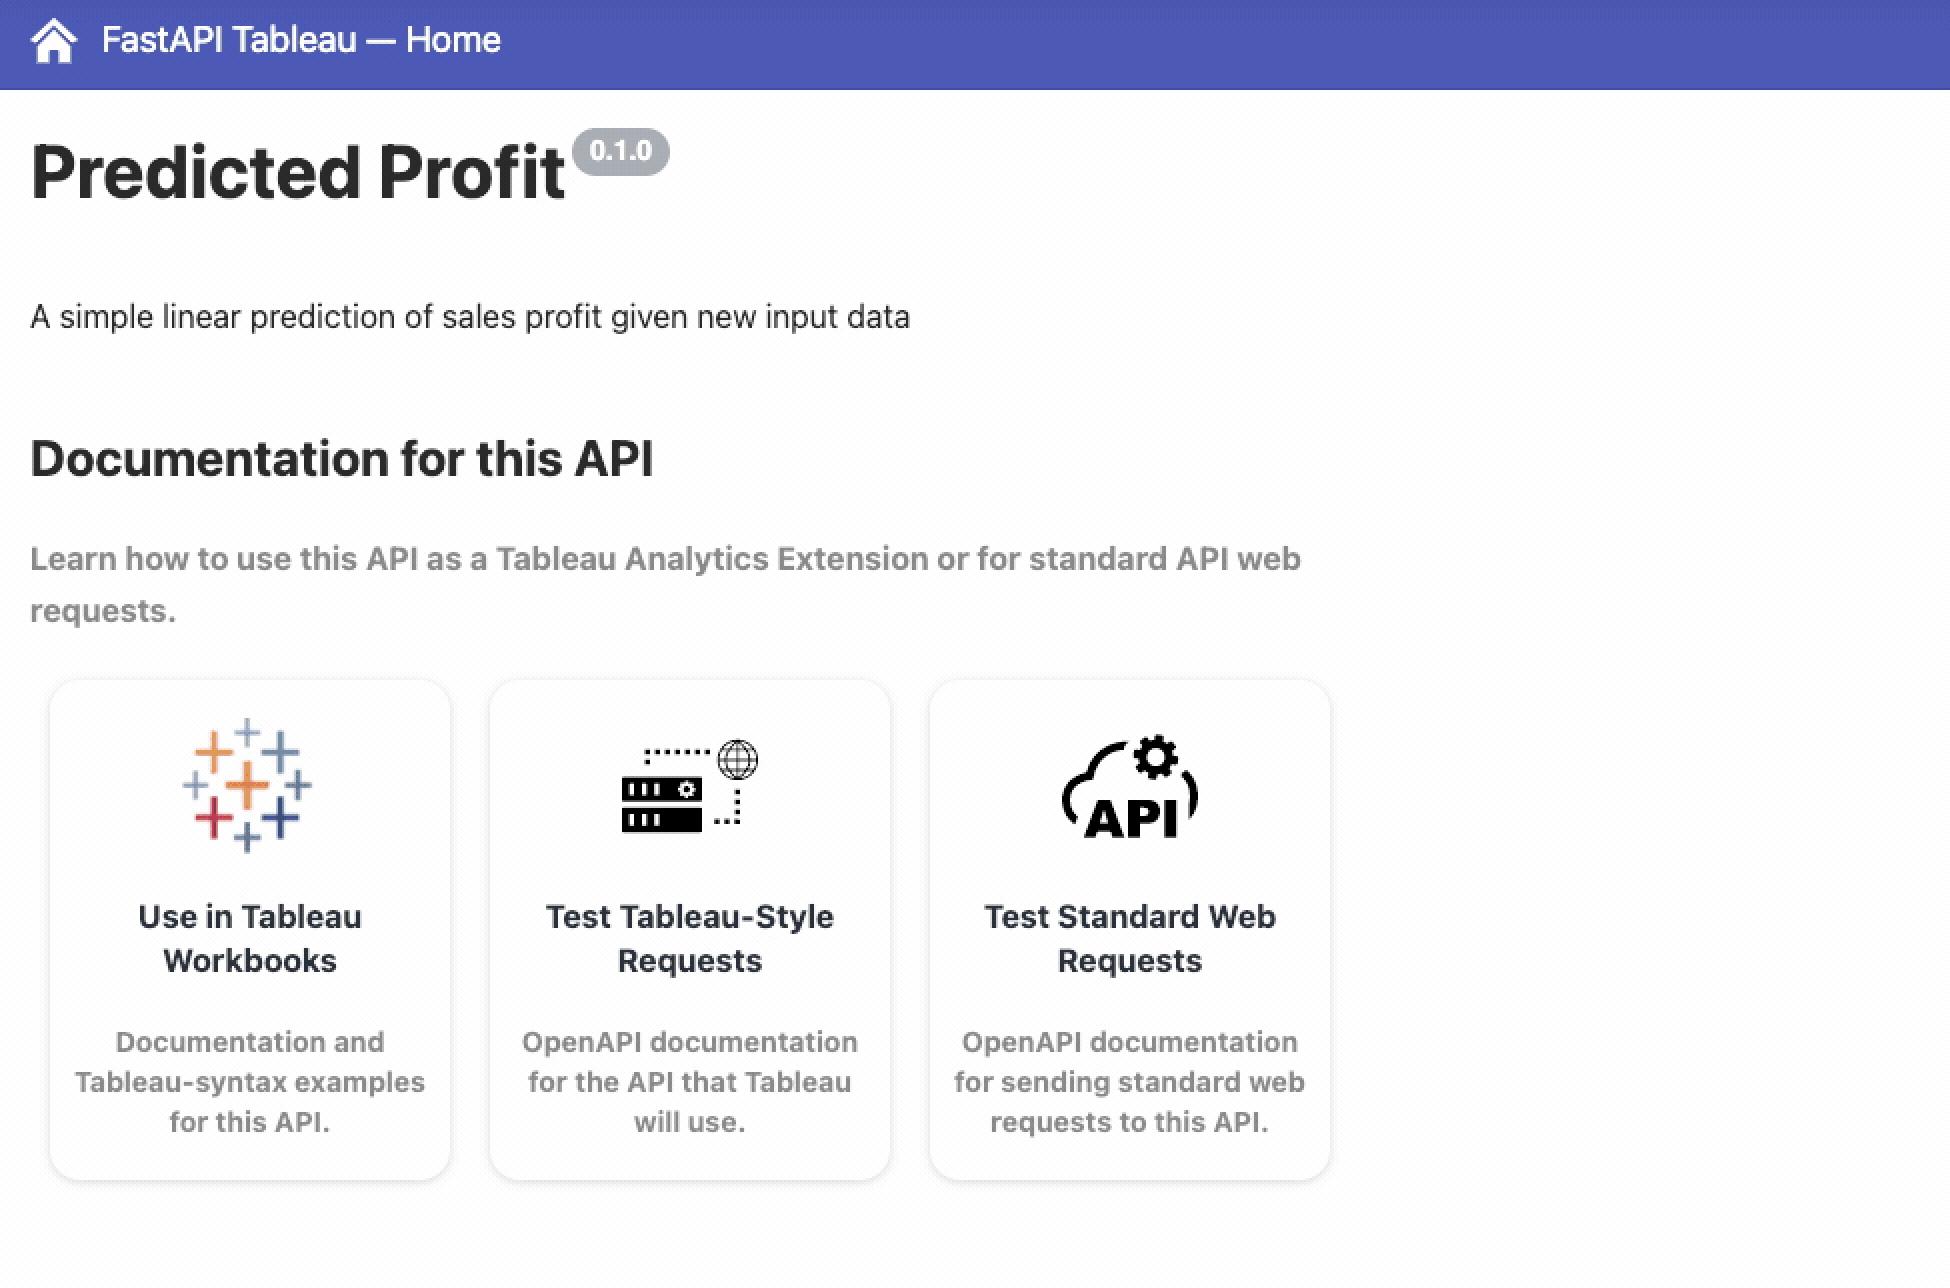 A FastAPI Tableau dashboard on Predicted Profit, showing documentation for the API.